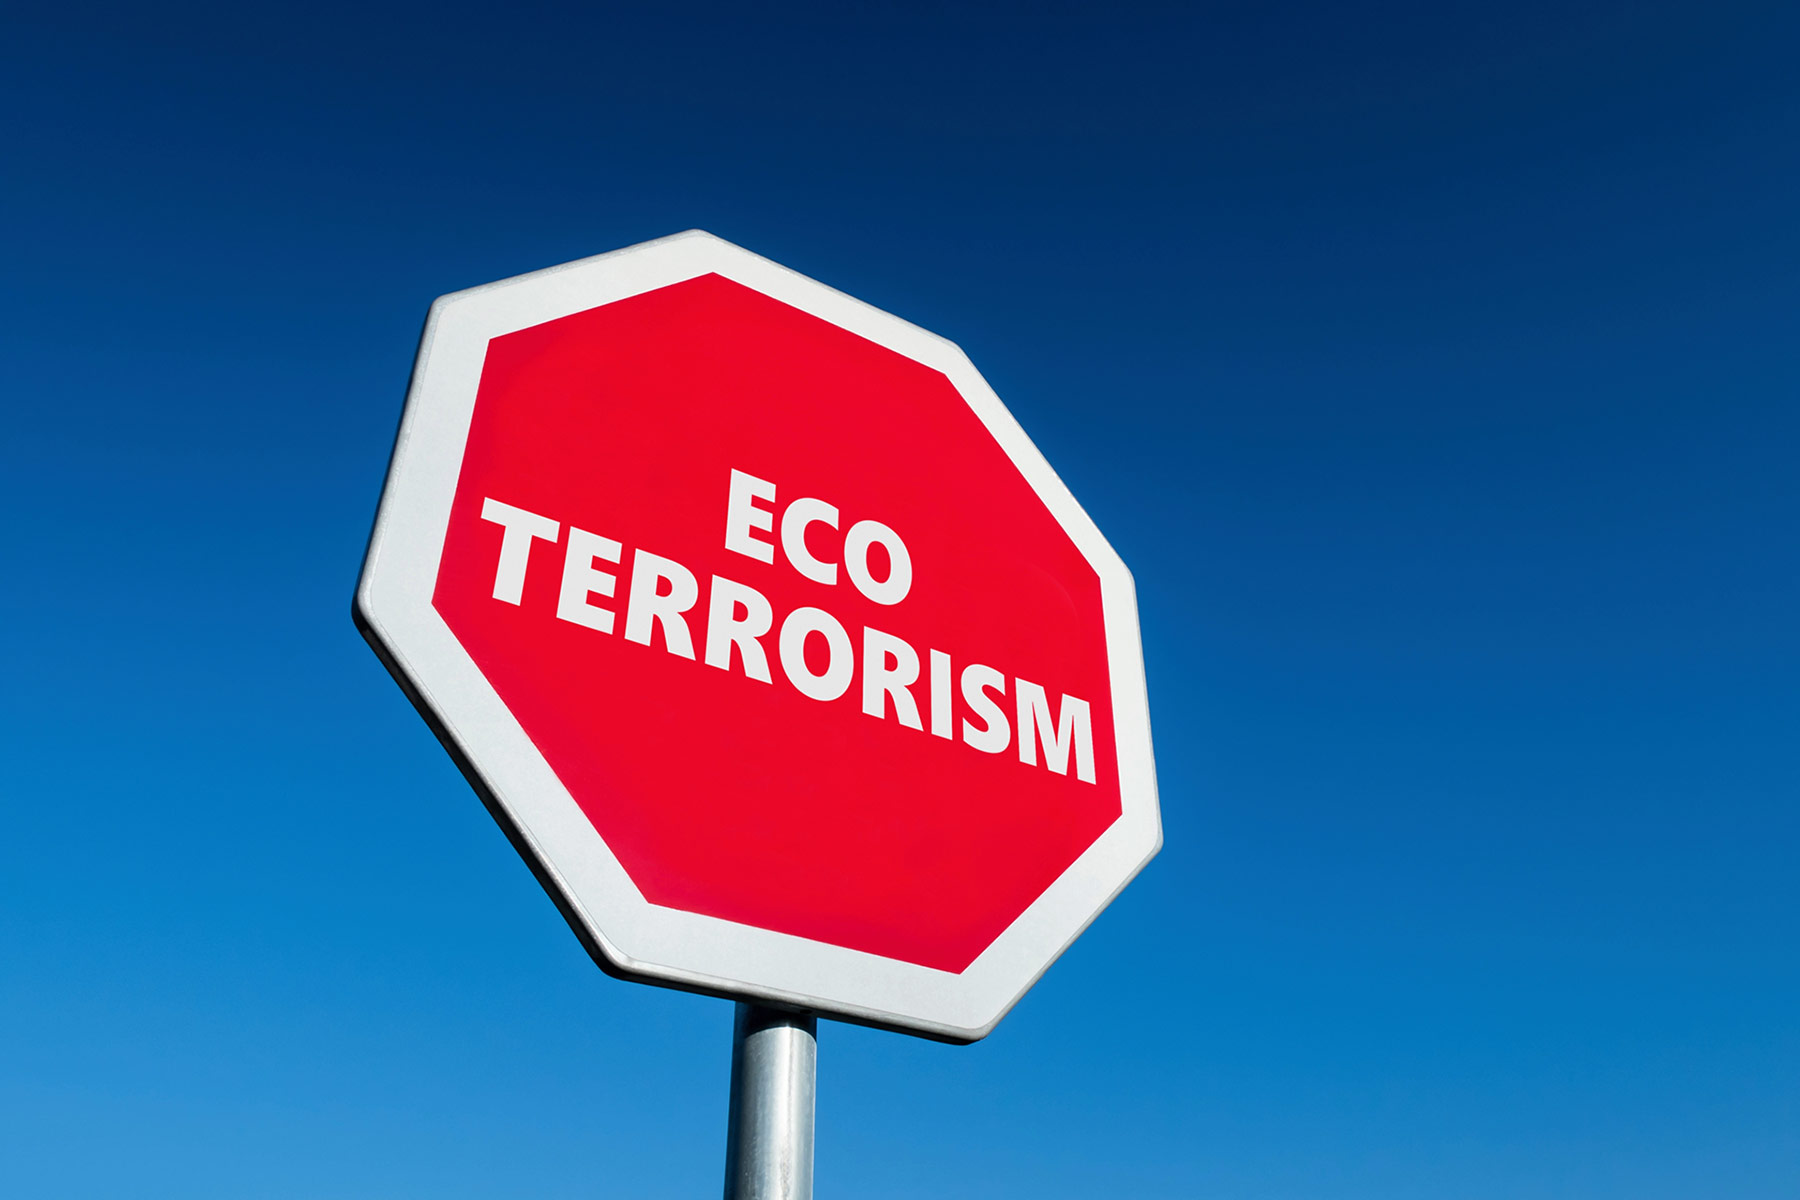 Elizabeth Dykstra-McCarthy, eco-terrorism, ecotage, climate change, climate activism, terrorism definitions, left-wing terrorism, attacks on nuclear facilities, Extinction Rebellion, environmental extremism